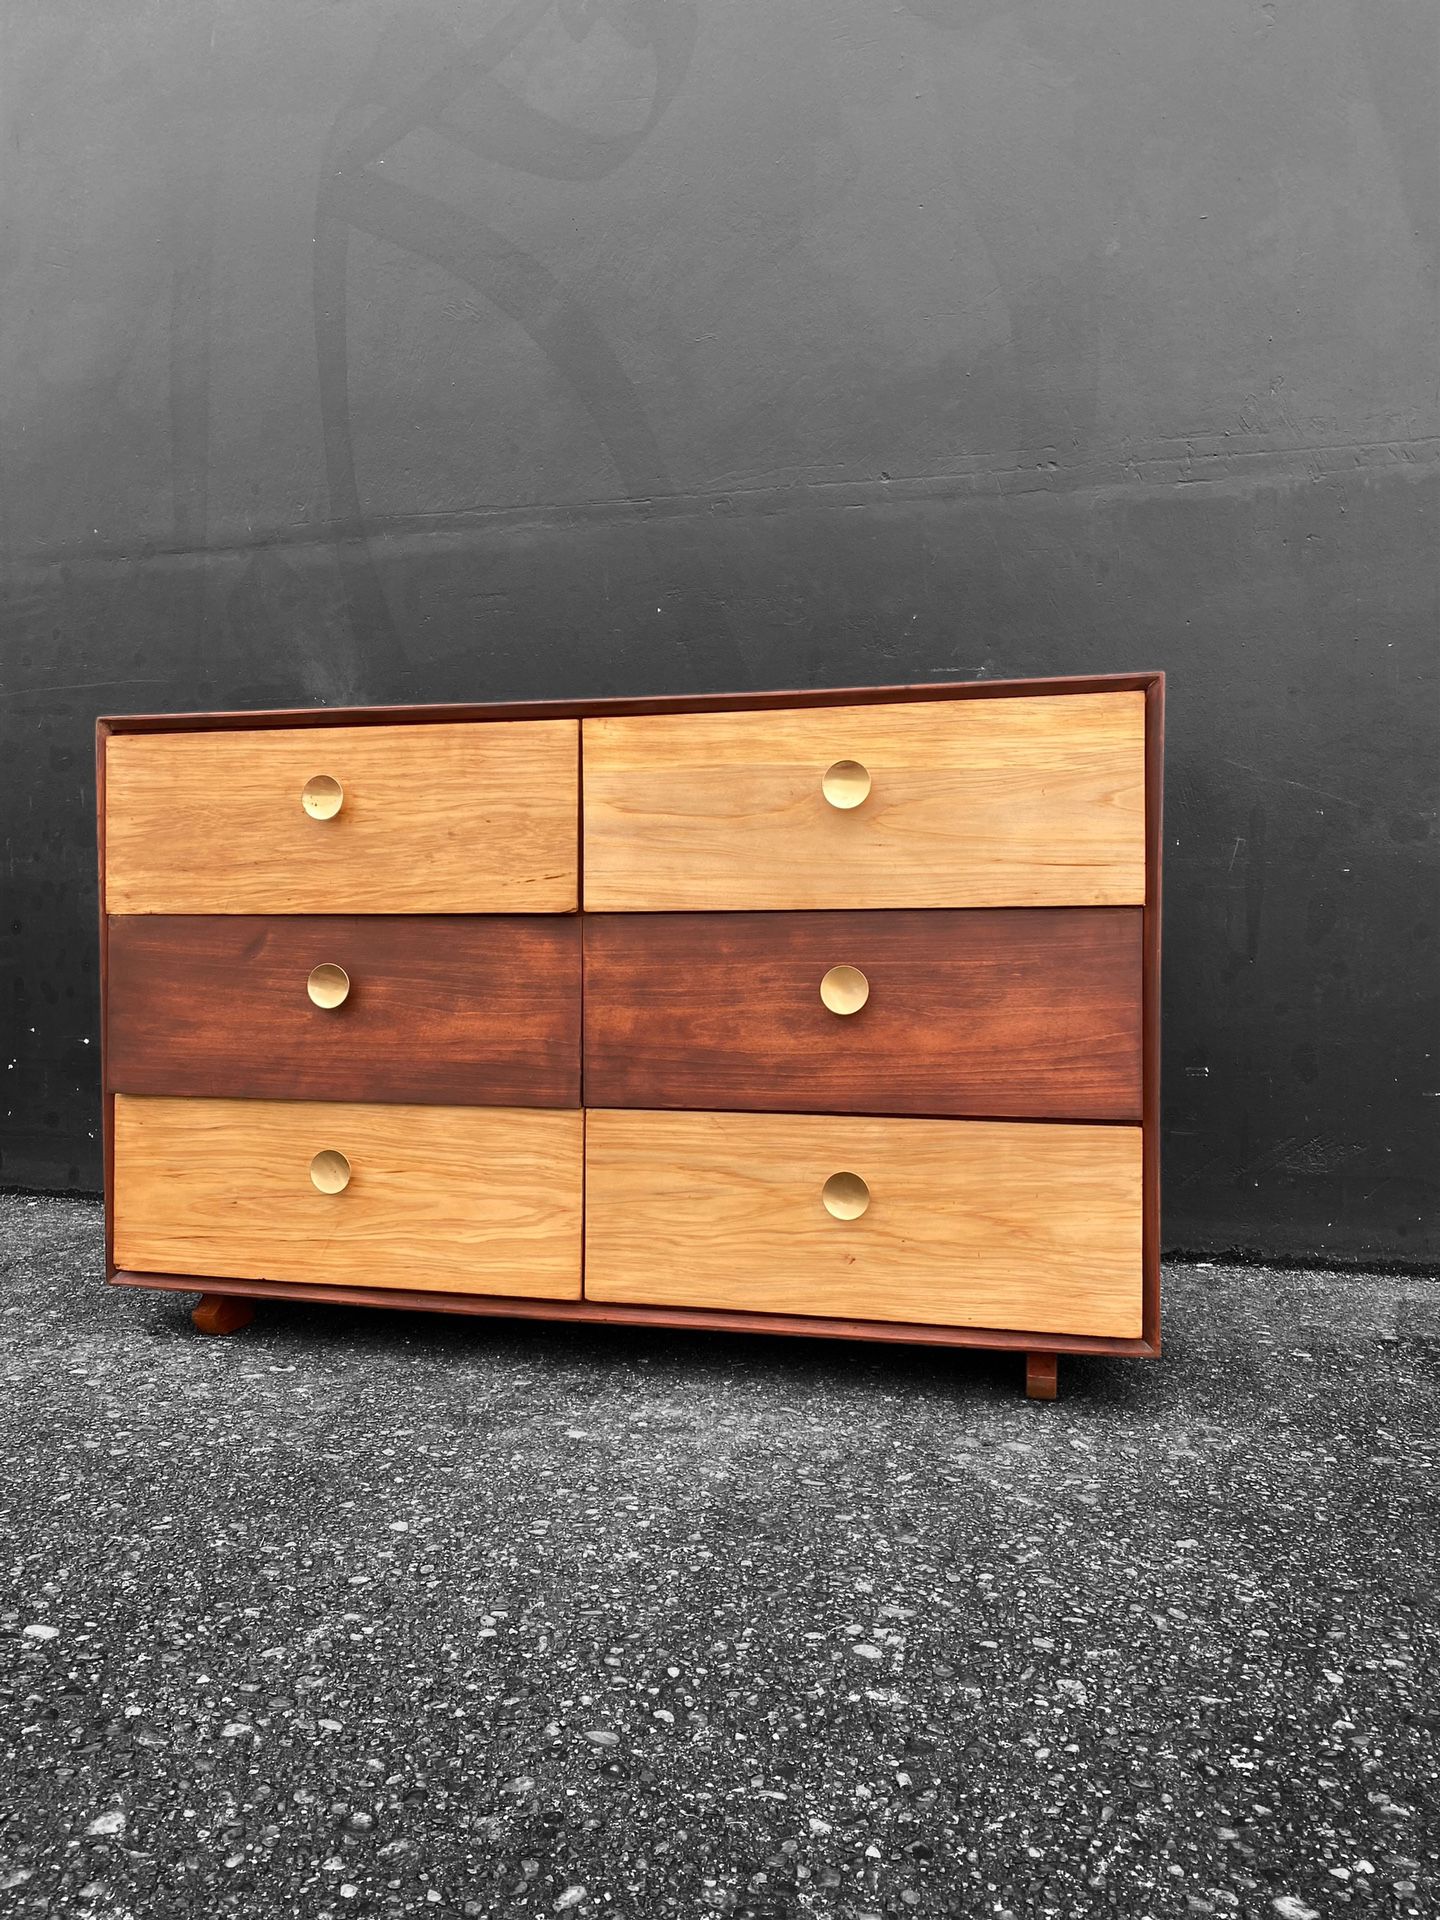 Unique Solid Wood MCM Dresser With A Reimagined Twist